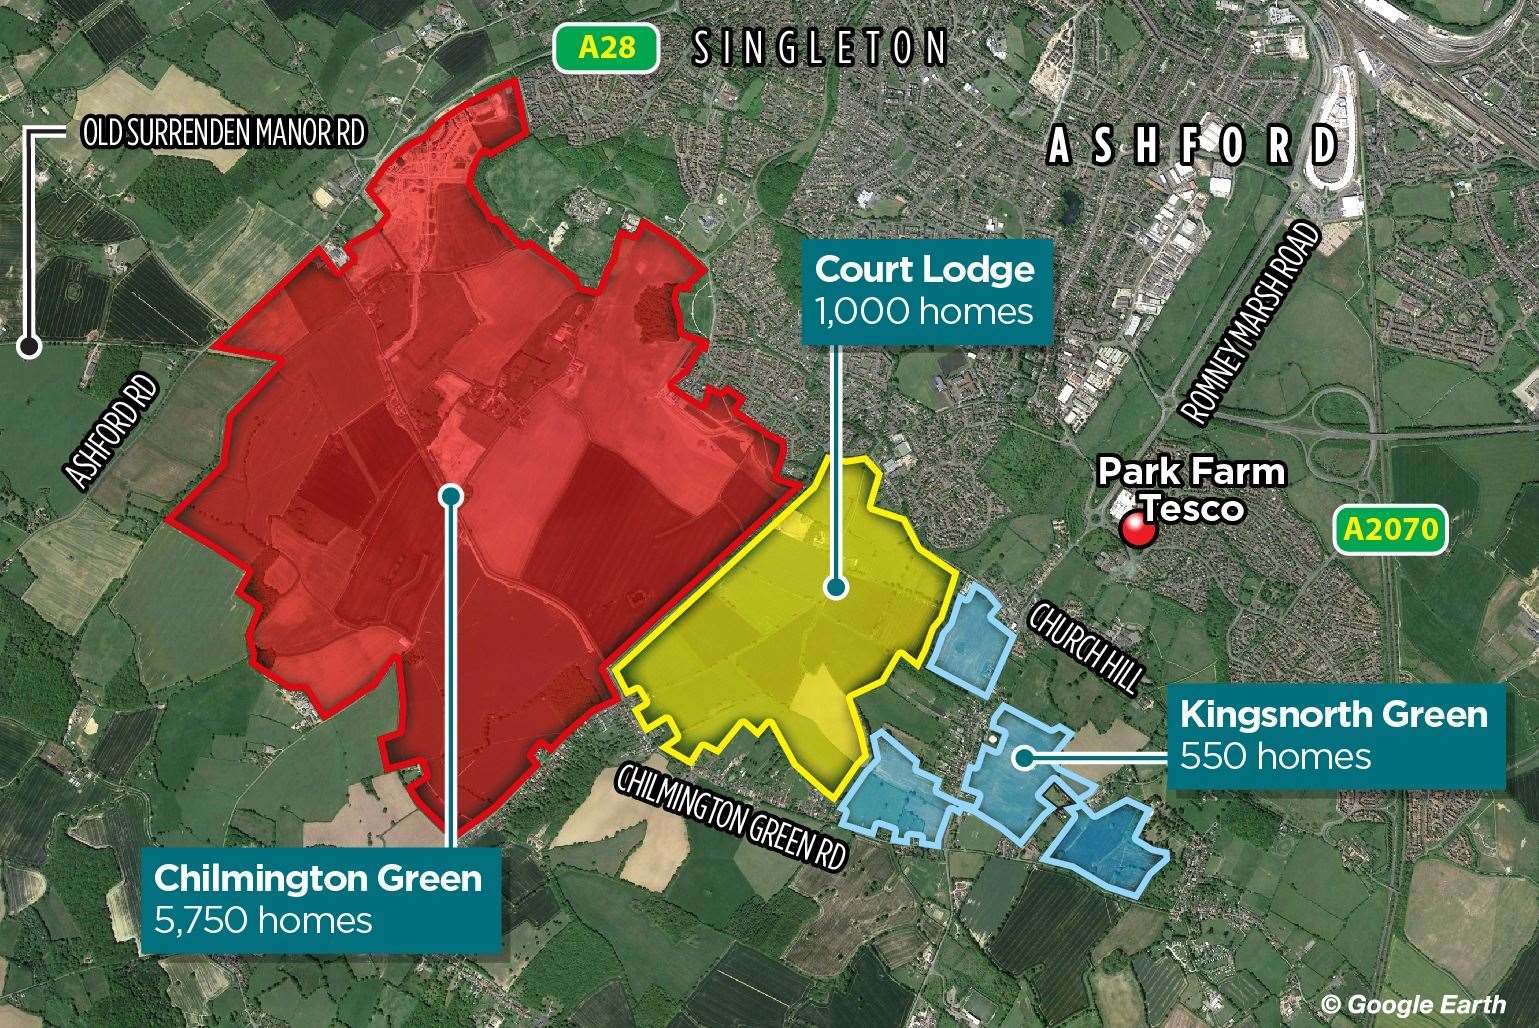 ‘Kingsnorth Green’ is to form part of South of Ashford Garden Community, joining ‘Court Lodge’ and Chilmington Green